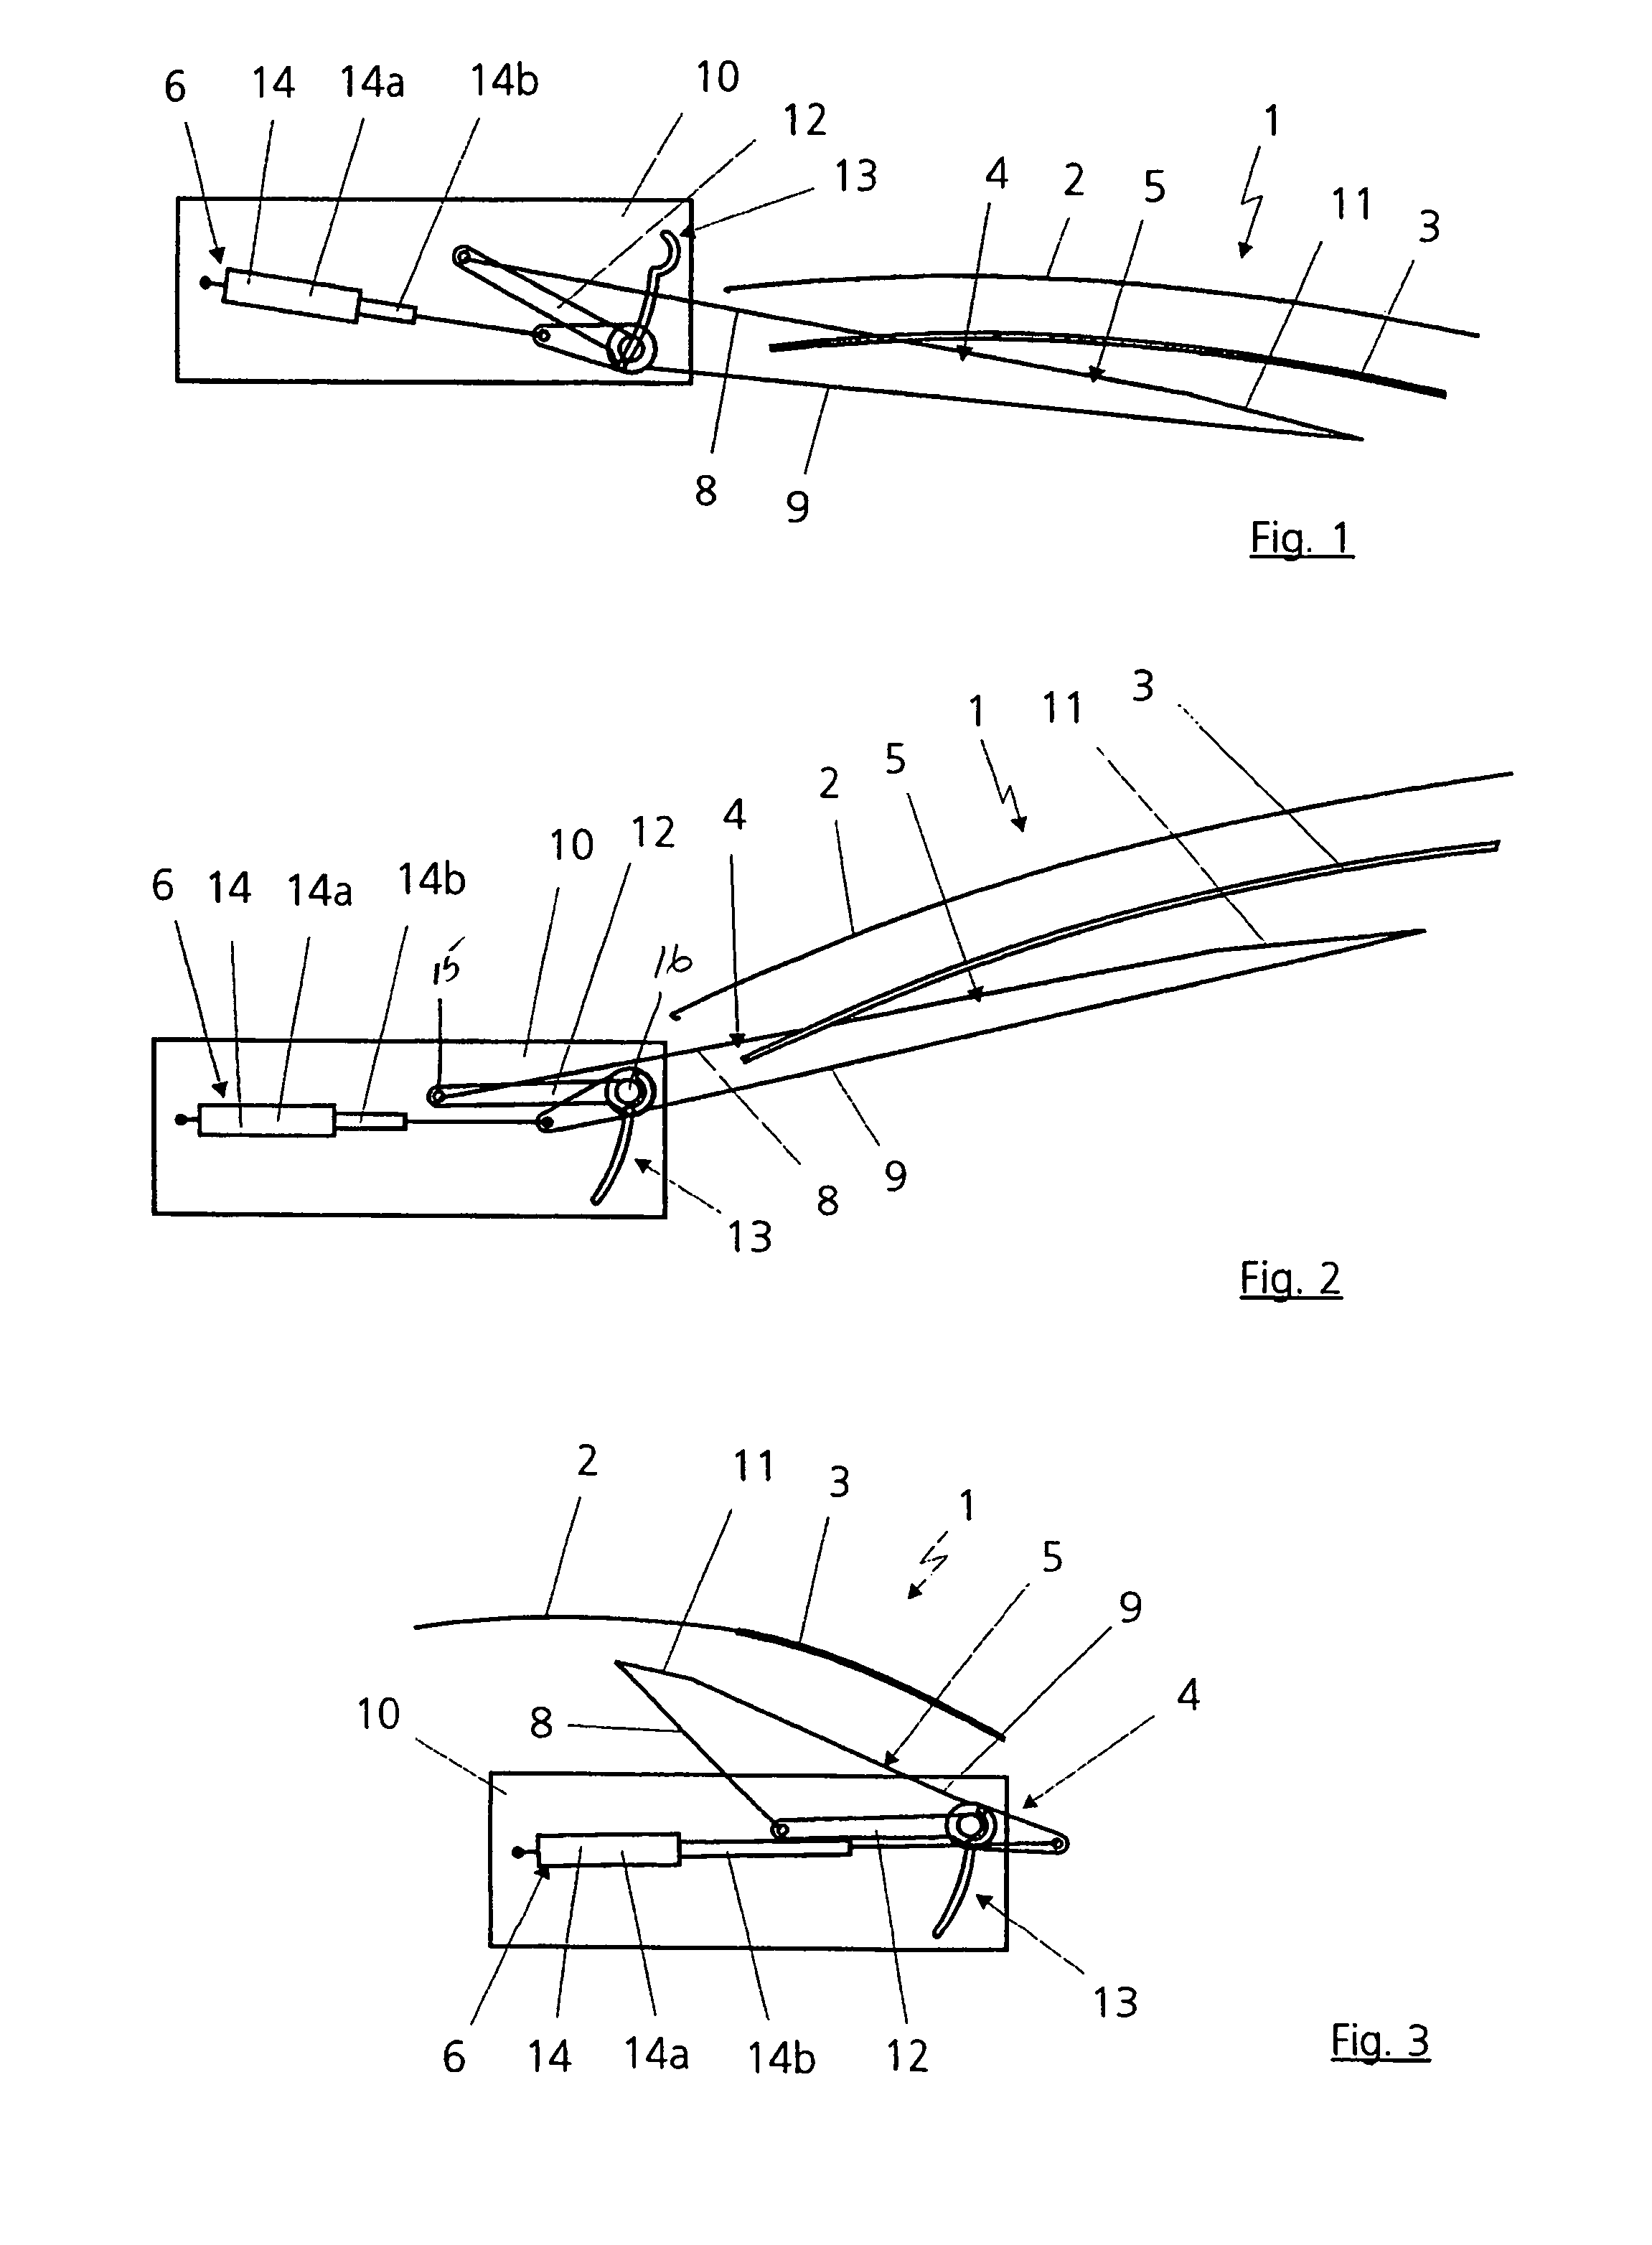 Folding convertible top for a vehicle